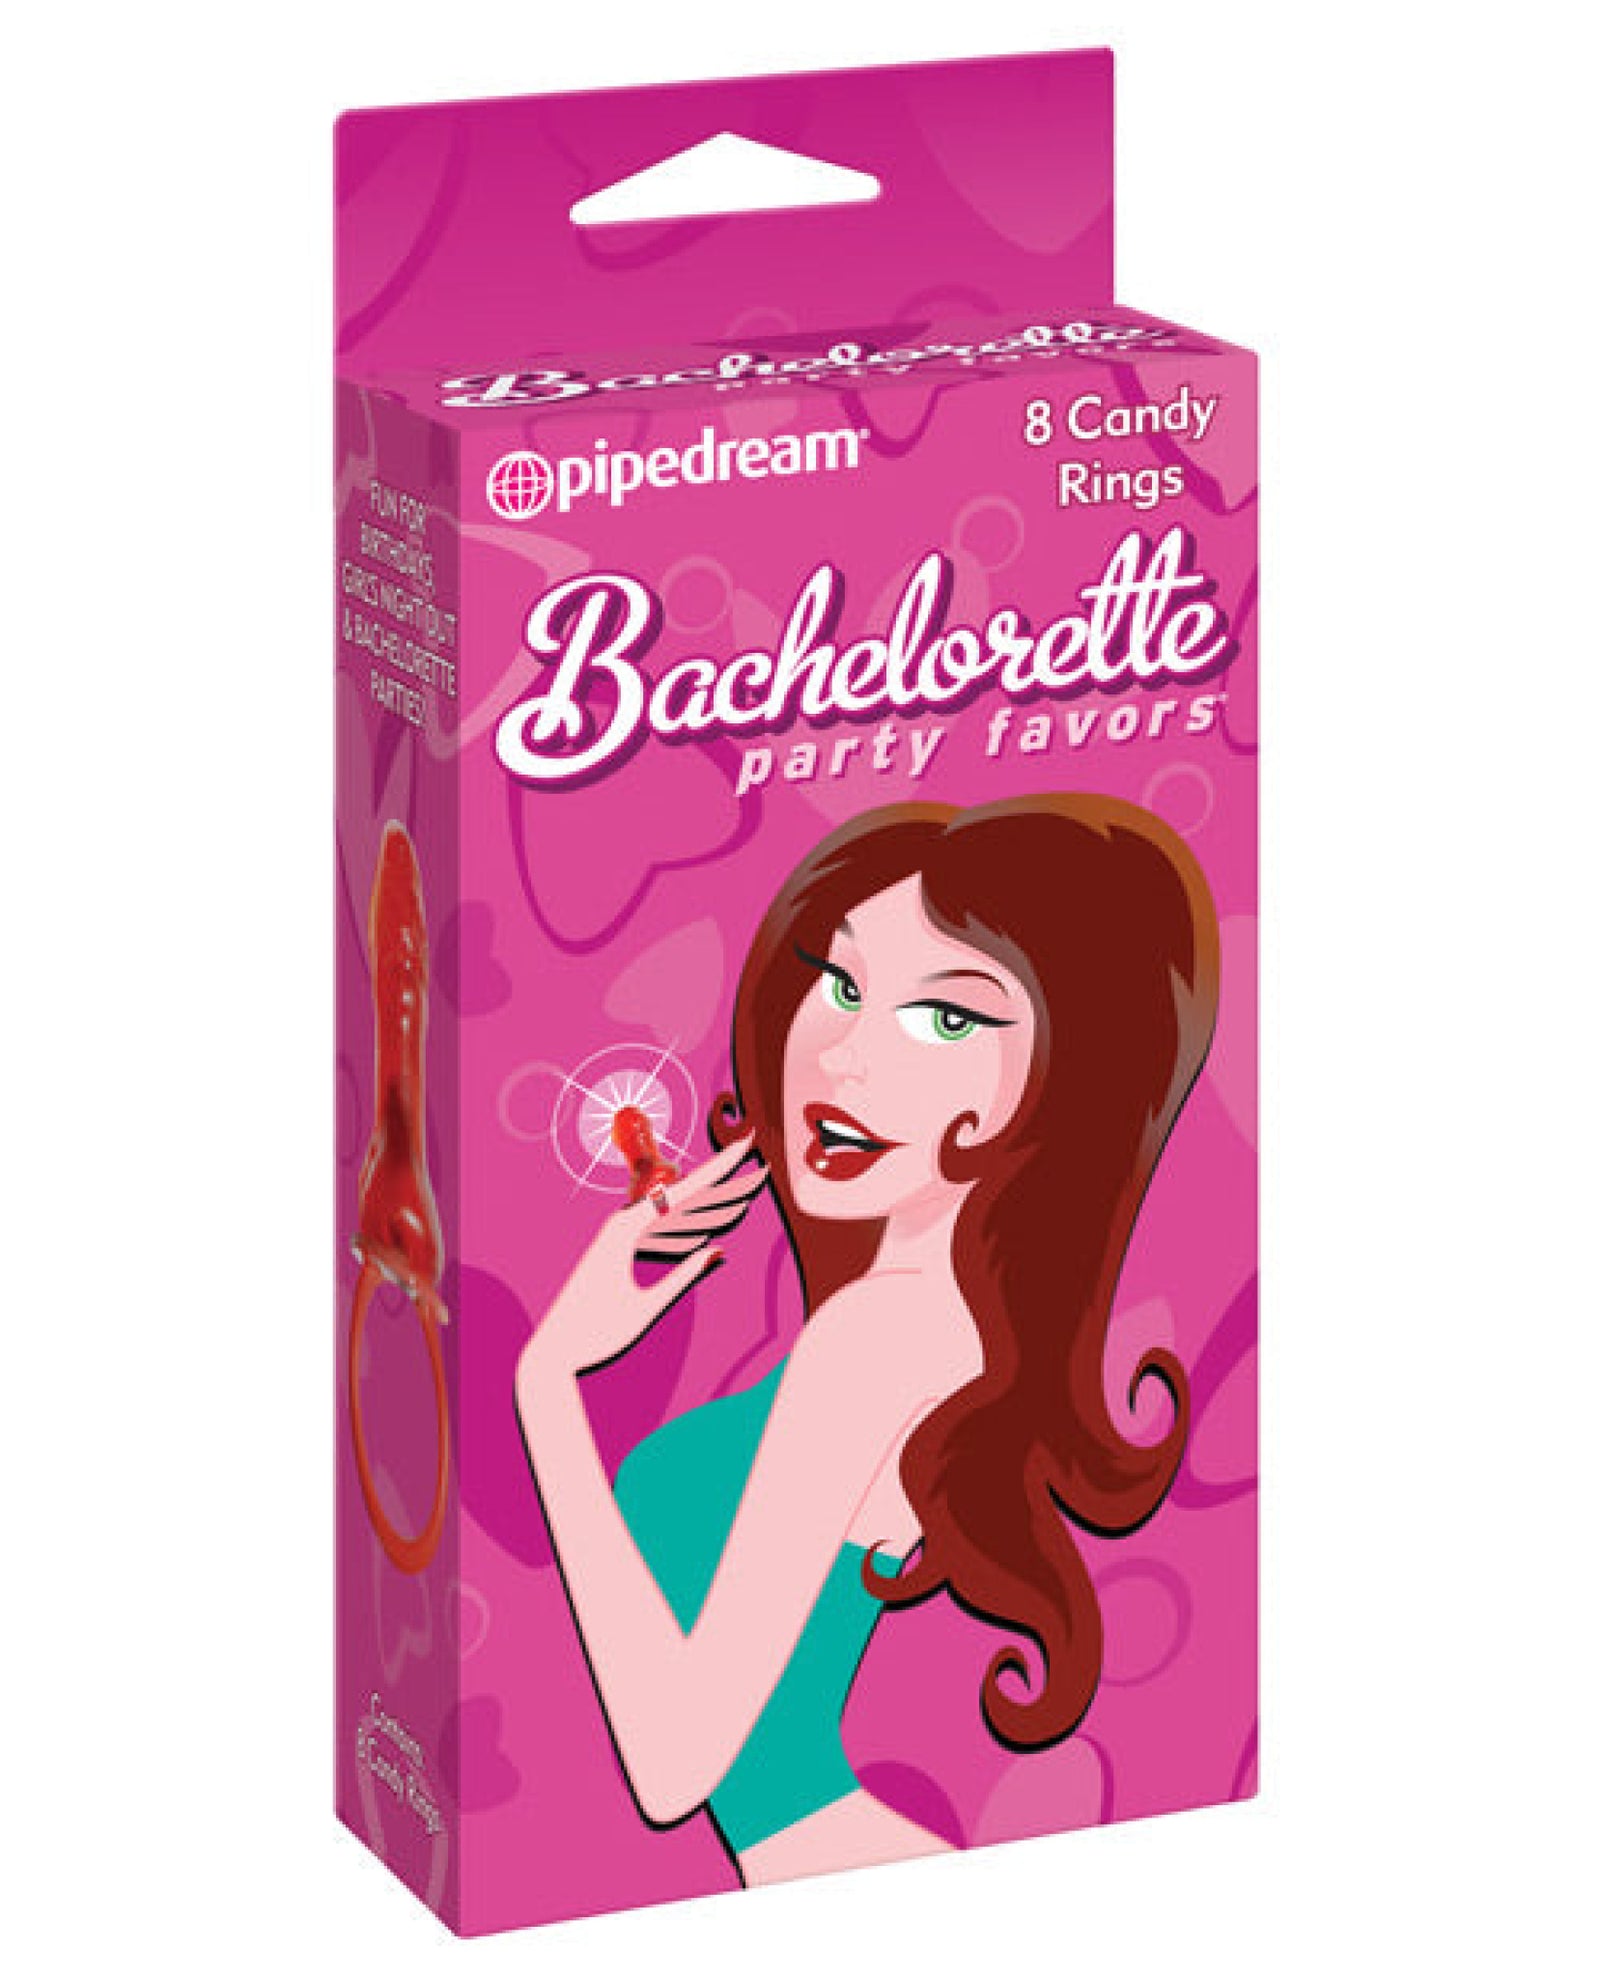 Bachelorette Party Favors Candy Rings - Box Of 8 Pipedream®